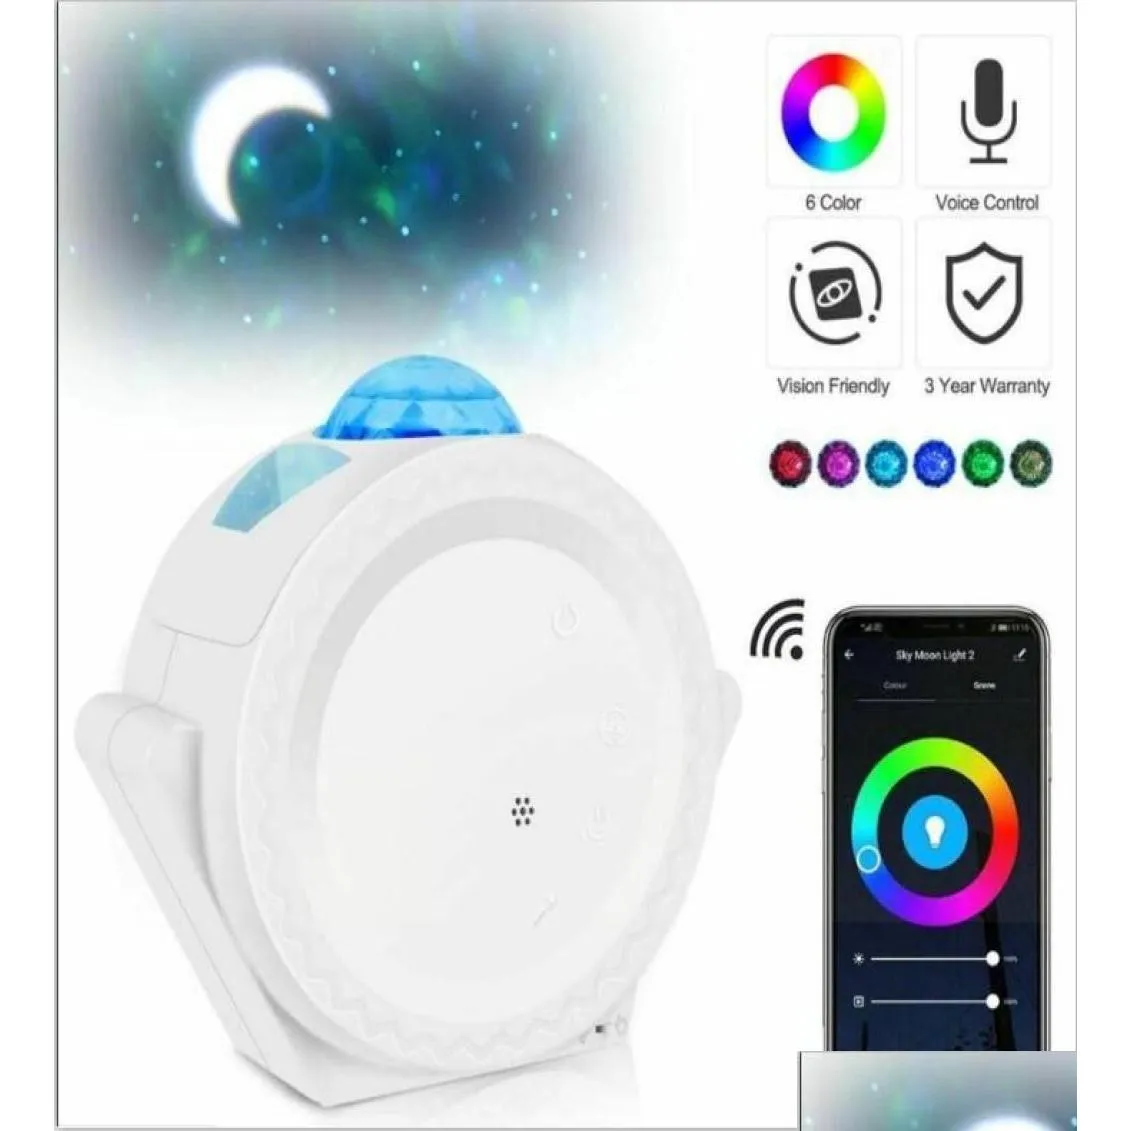 LED Gadget Est 3 i 1 Projector Light Universe Starry Creative Night for Party Home Fast 9914250 Drop Delivery Electronics Gadgets DH5N4